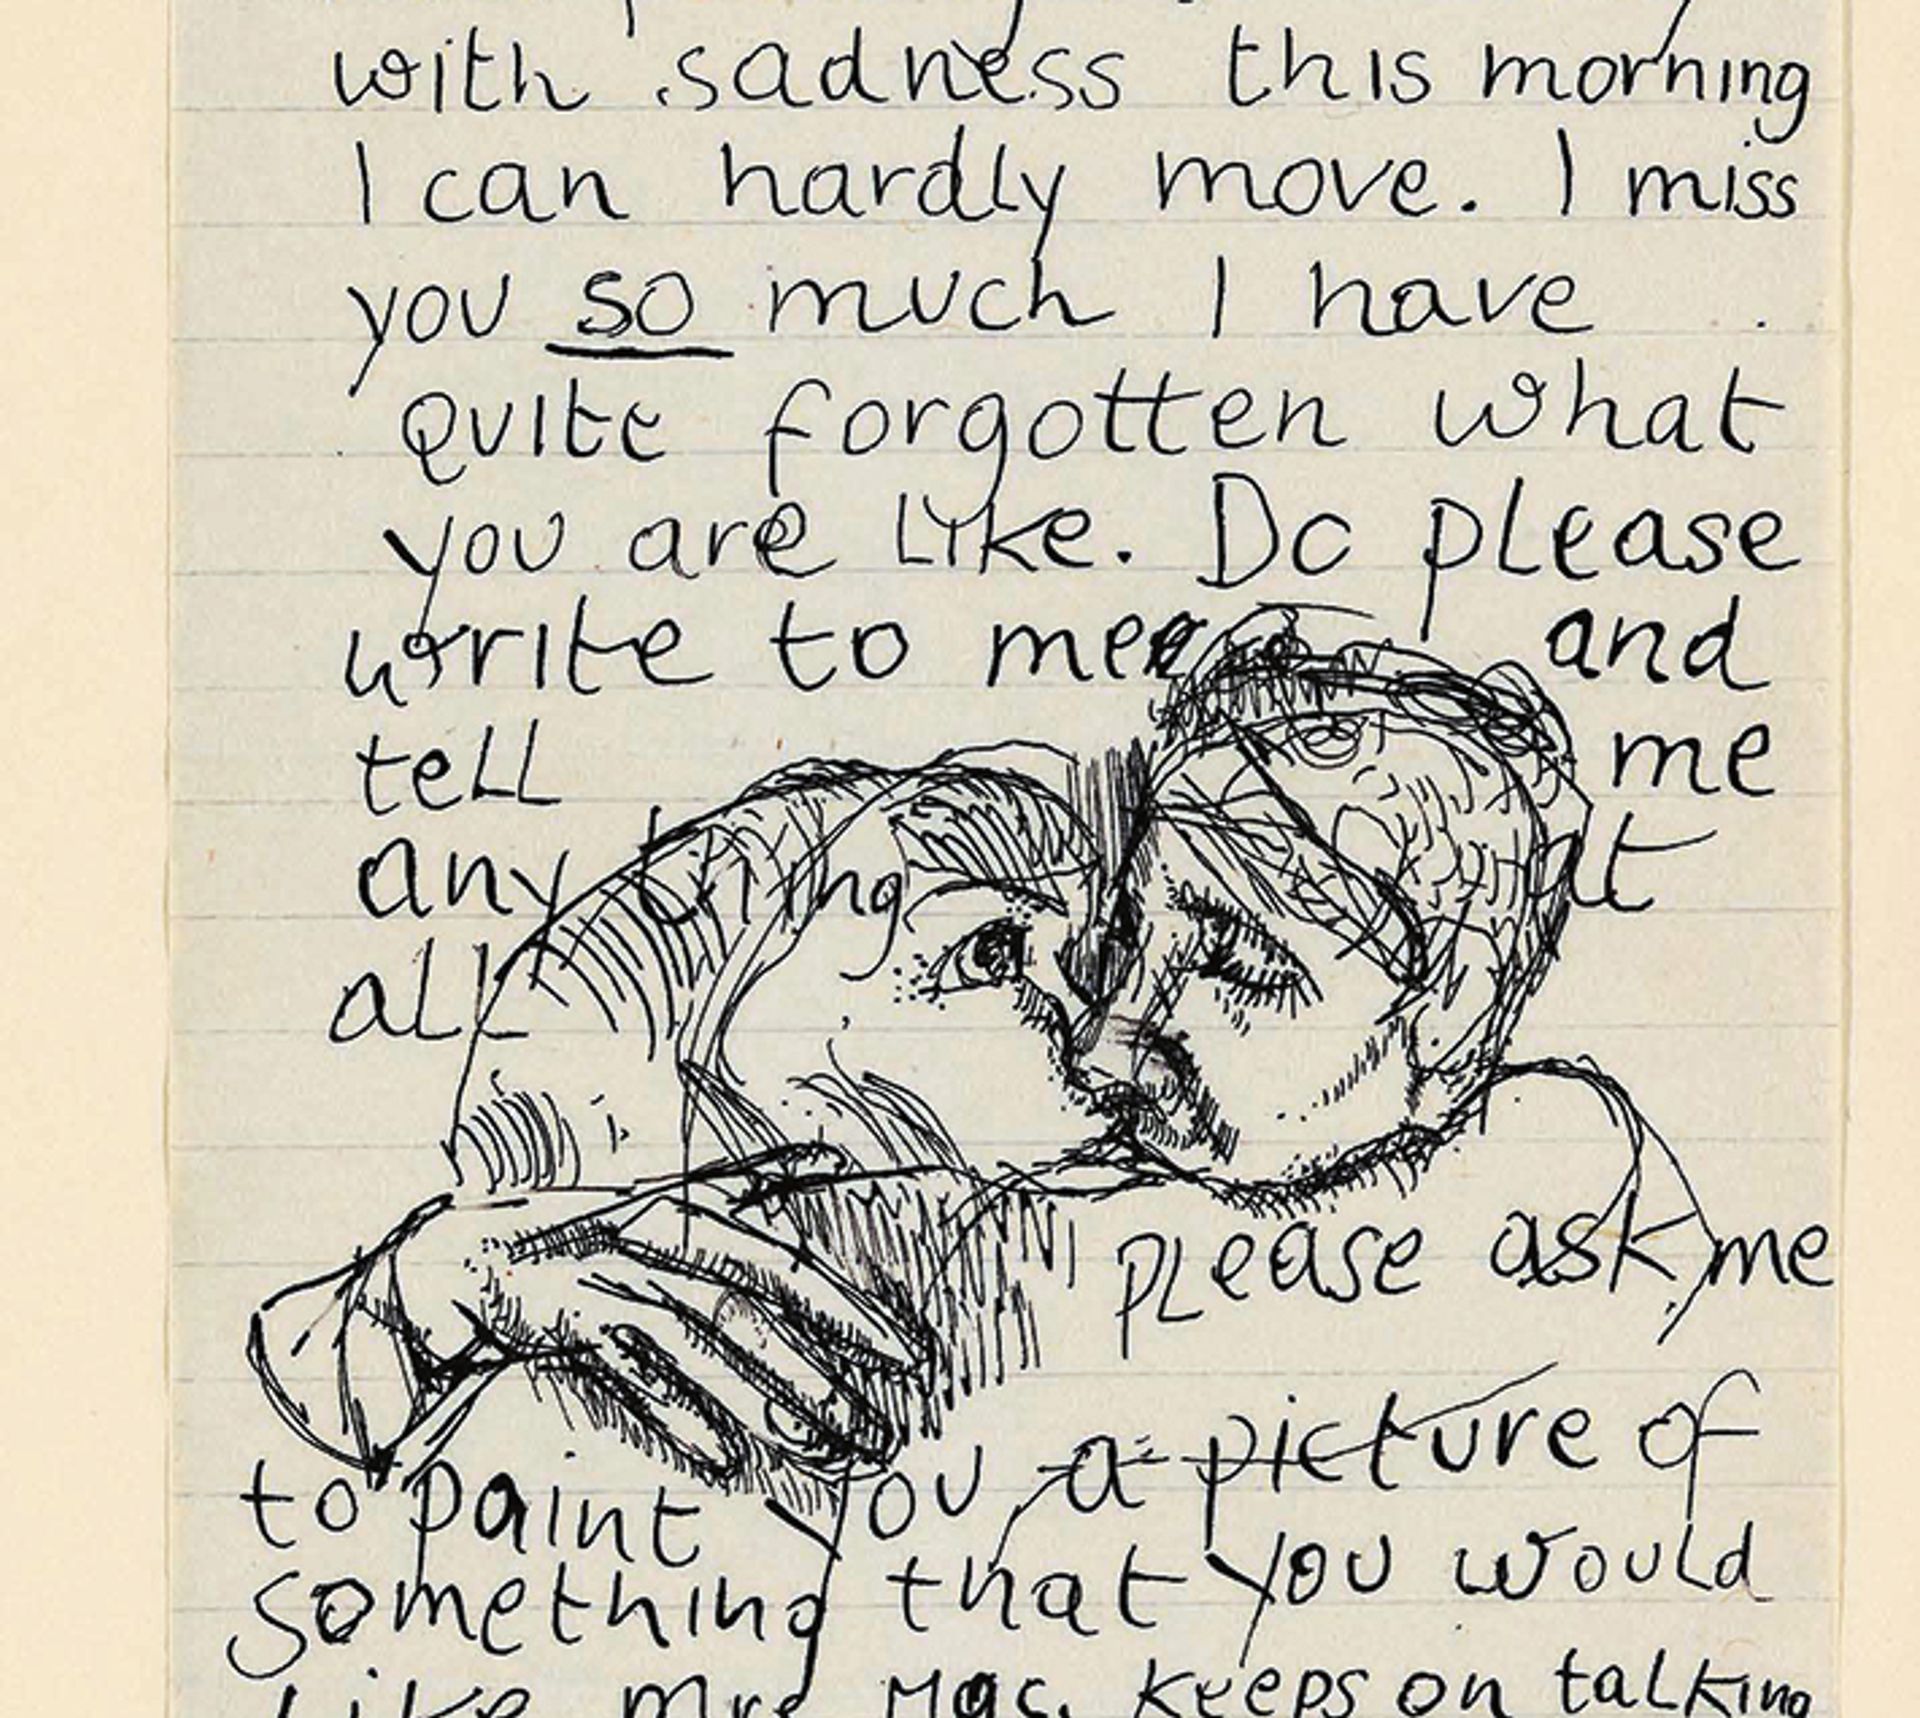 A 1952 illustrated letter from Freud to Lady Caroline Blackwood, with characteristically childlike handwriting